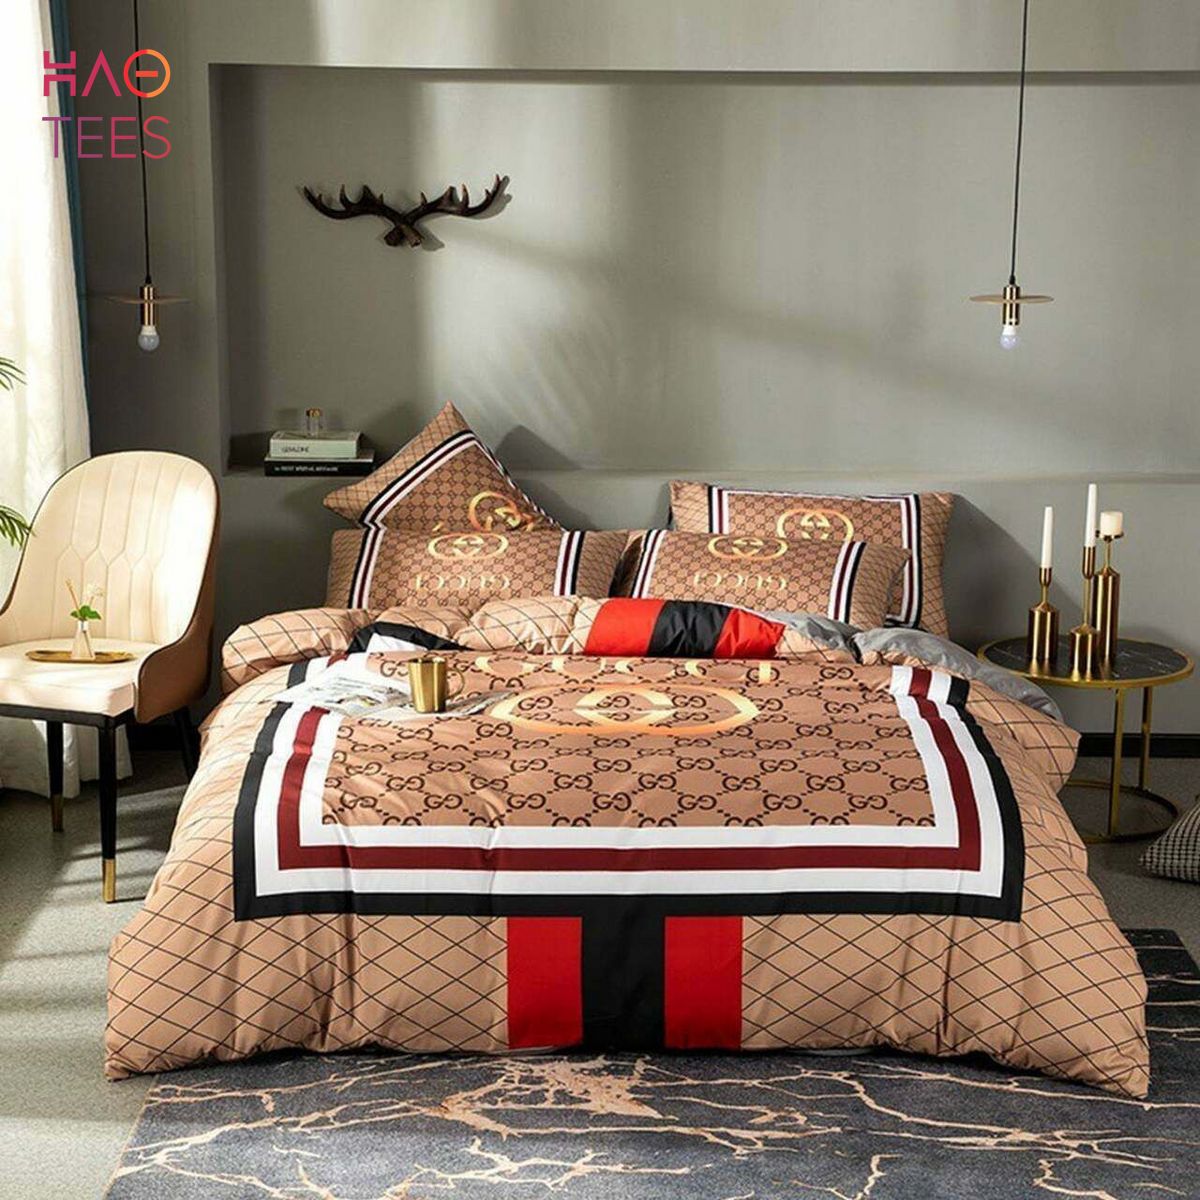 GC Brown Mix Color Luxury Brand Inspired 3D Personalized Customized Bedding Sets